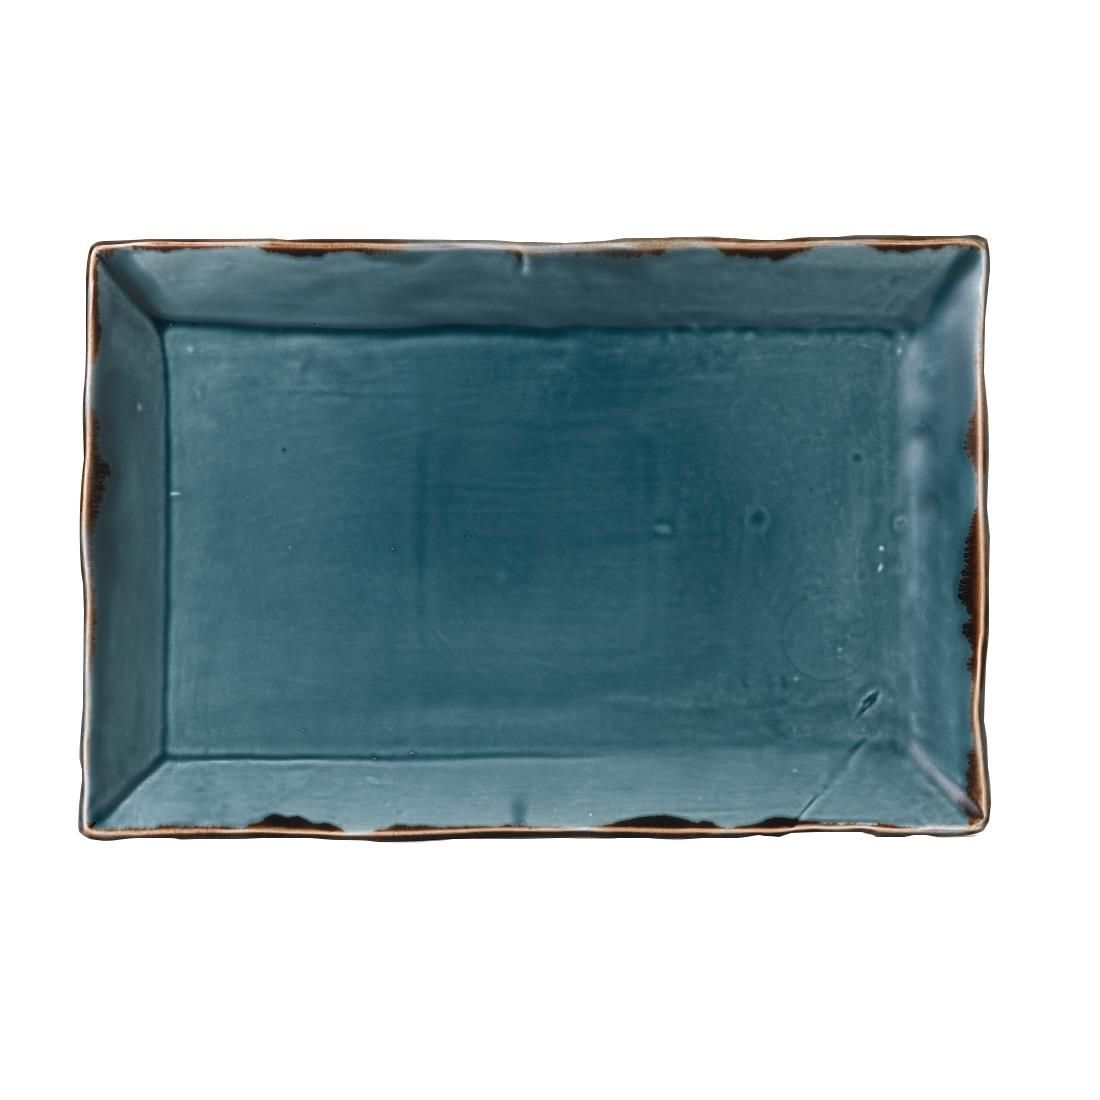 FC064 Dudson Harvest Rectangular Trays Blue 192 x 284mm (Pack of 6) JD Catering Equipment Solutions Ltd